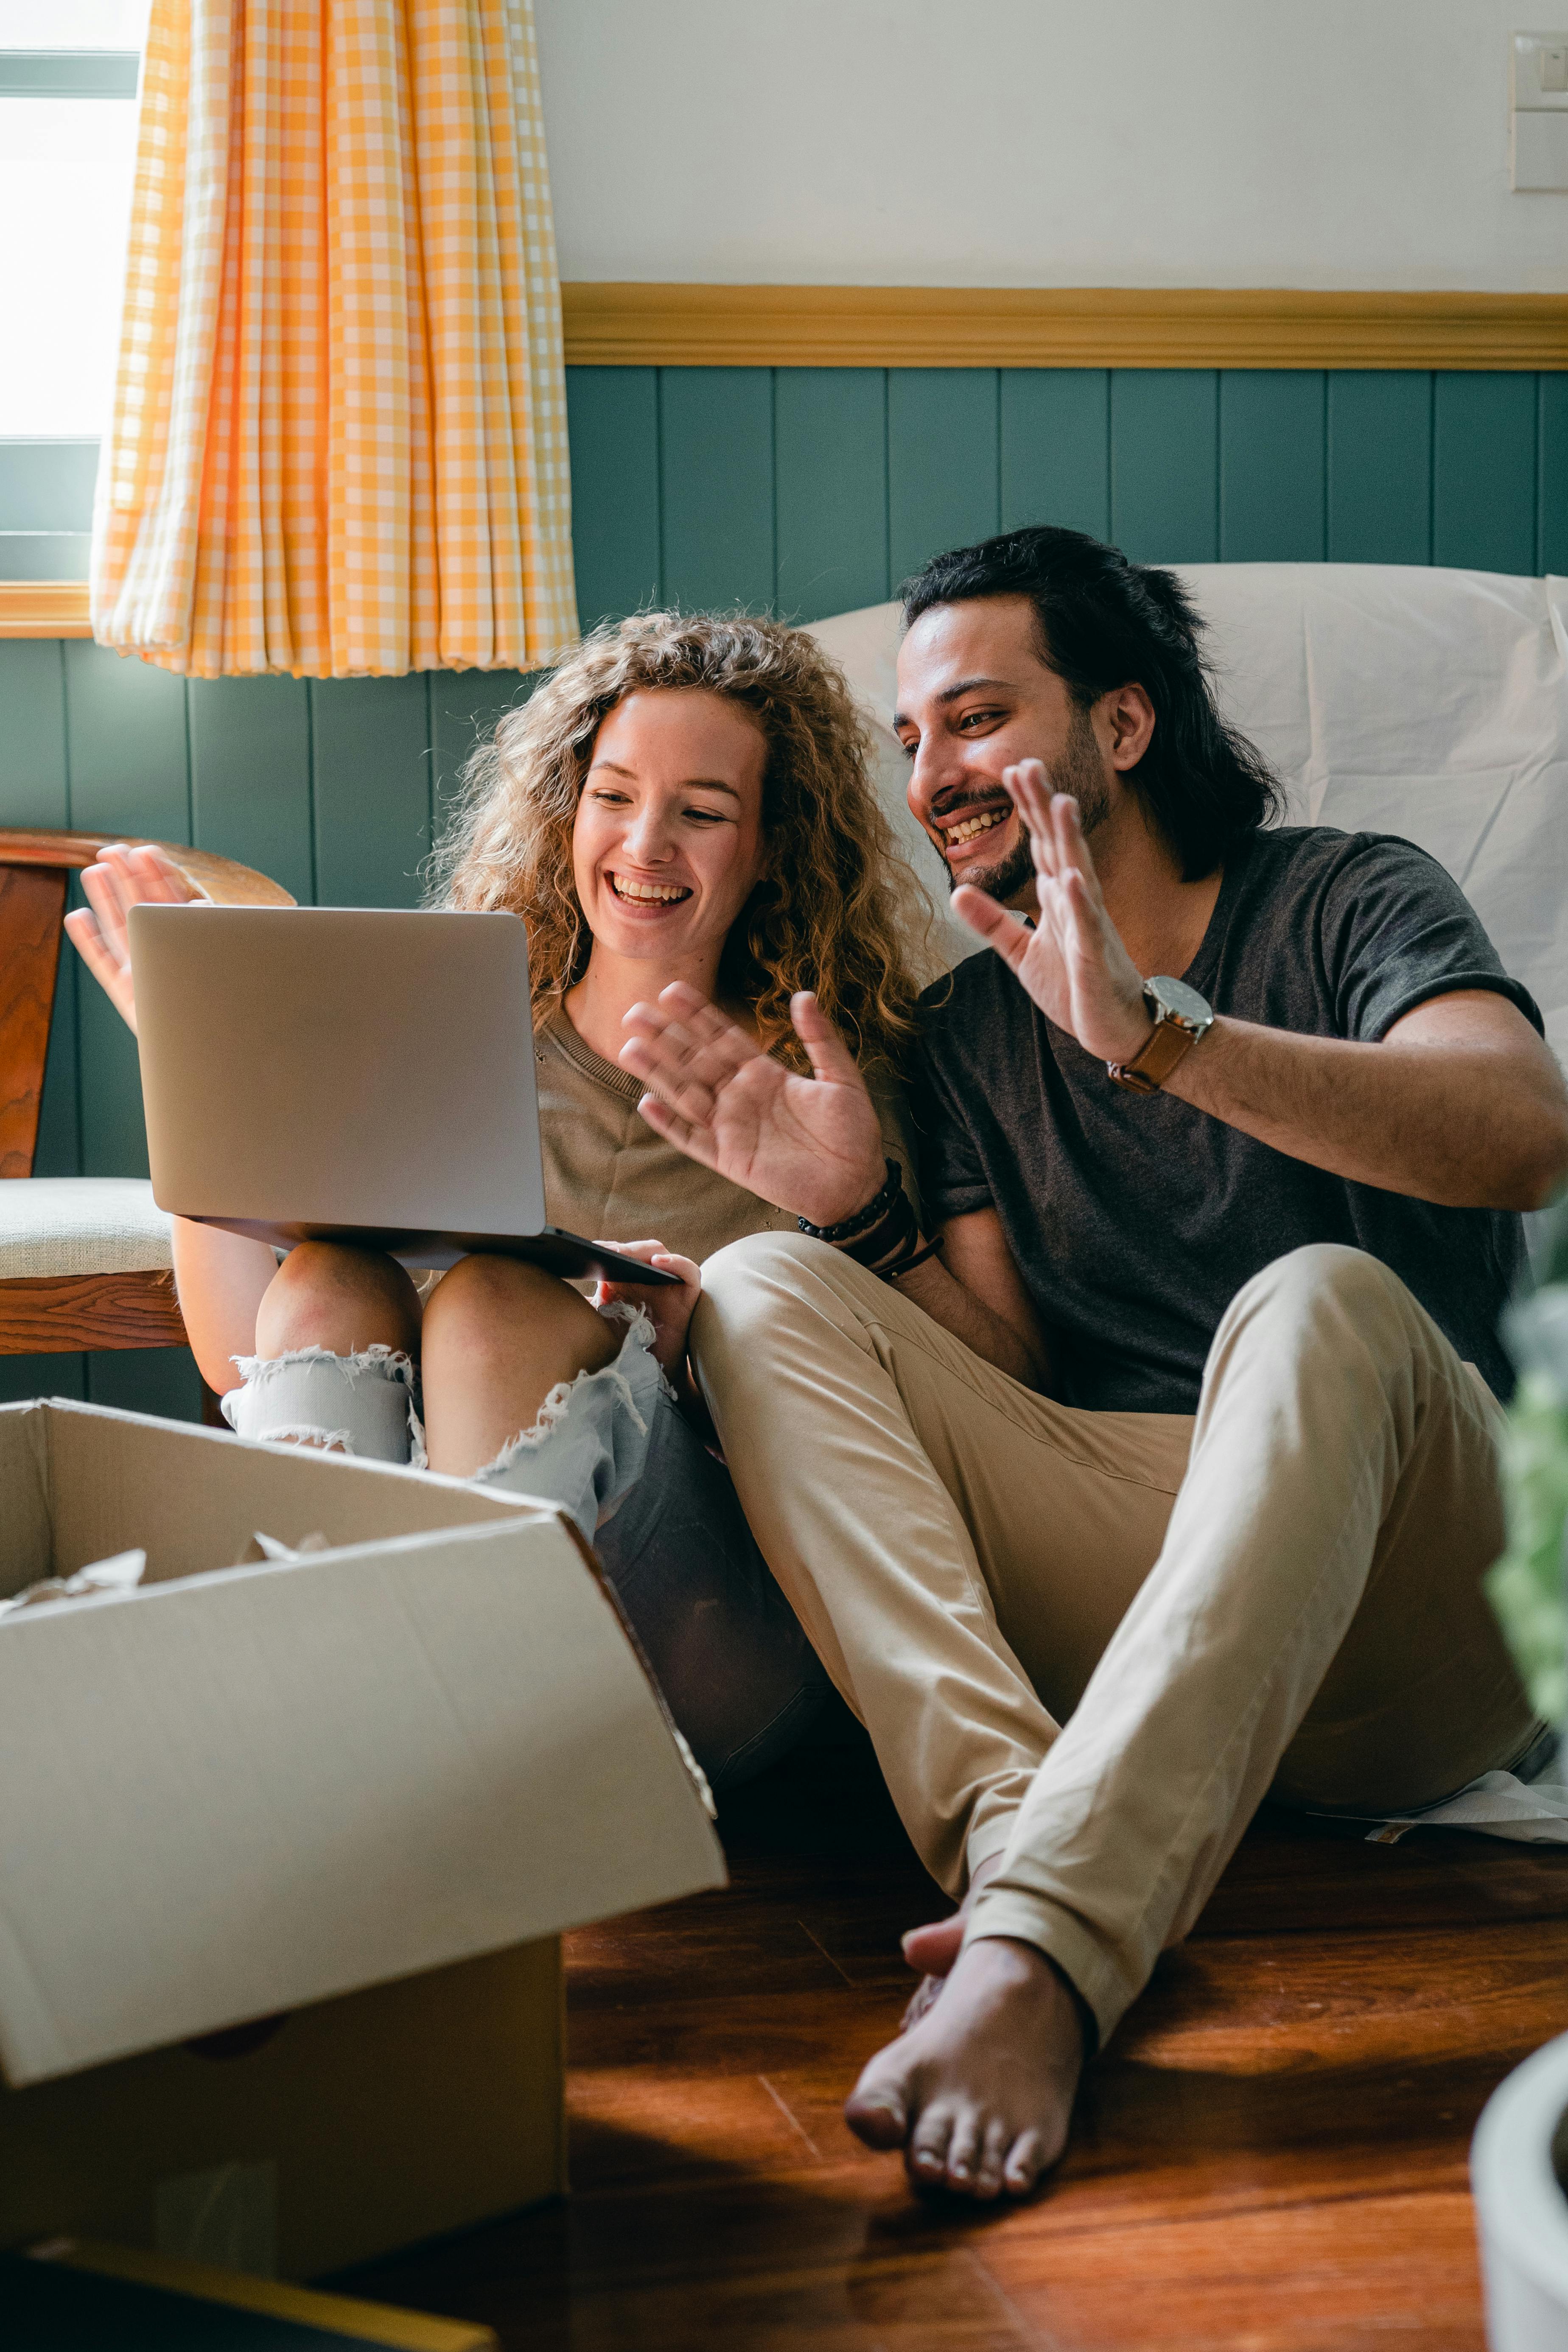 A happy couple looking at something on a laptop | Source: Pexels